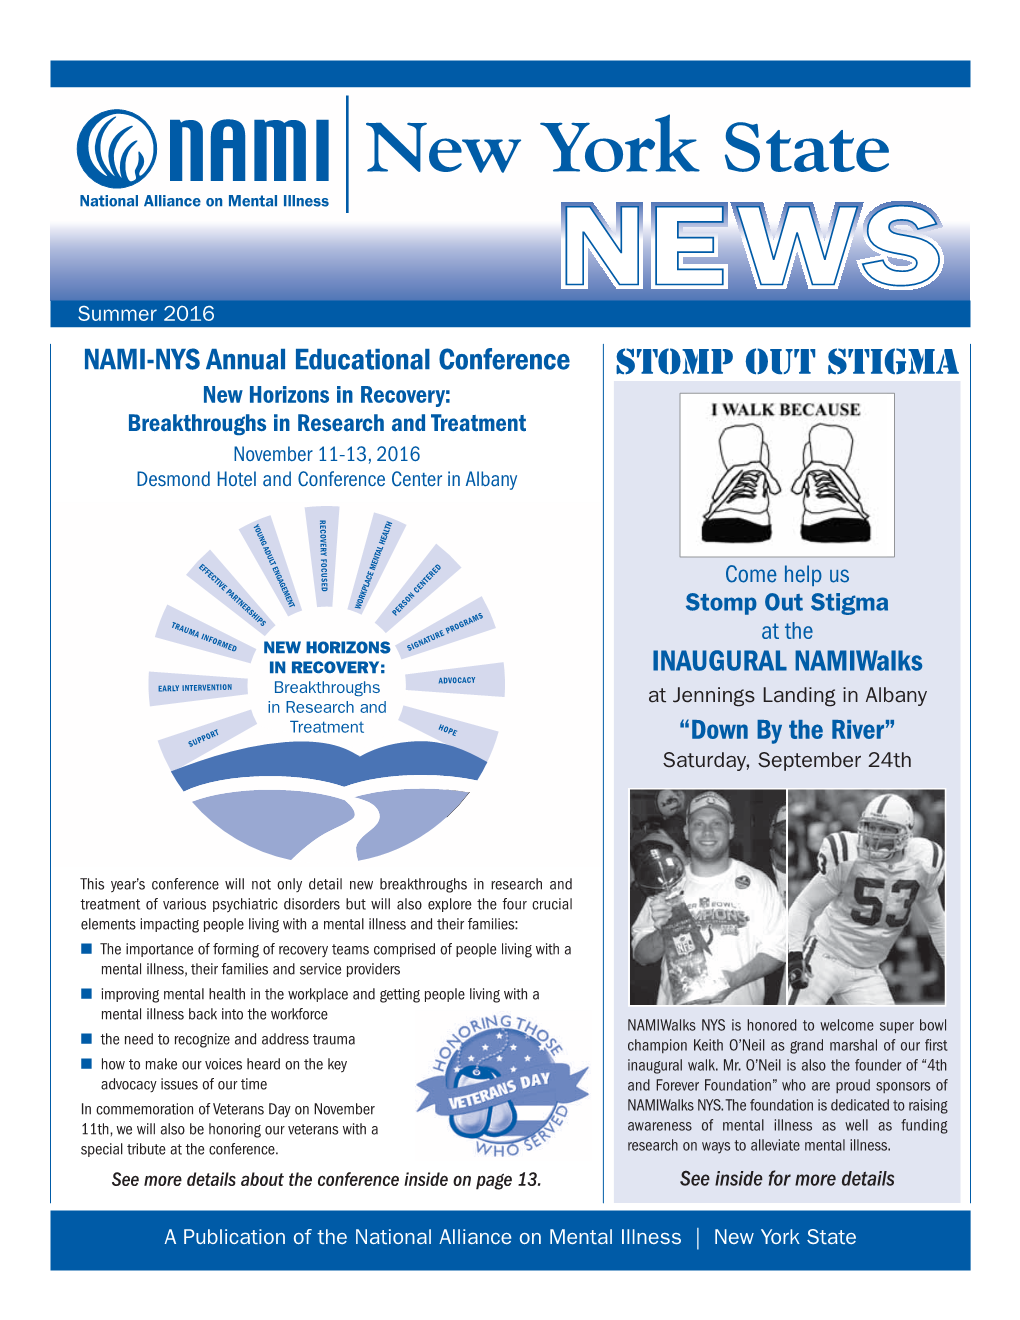 STOMP out STIGMA New Horizons in Recovery: Breakthroughs in Research and Treatment November 11-13, 2016 Desmond Hotel and Conference Center in Albany